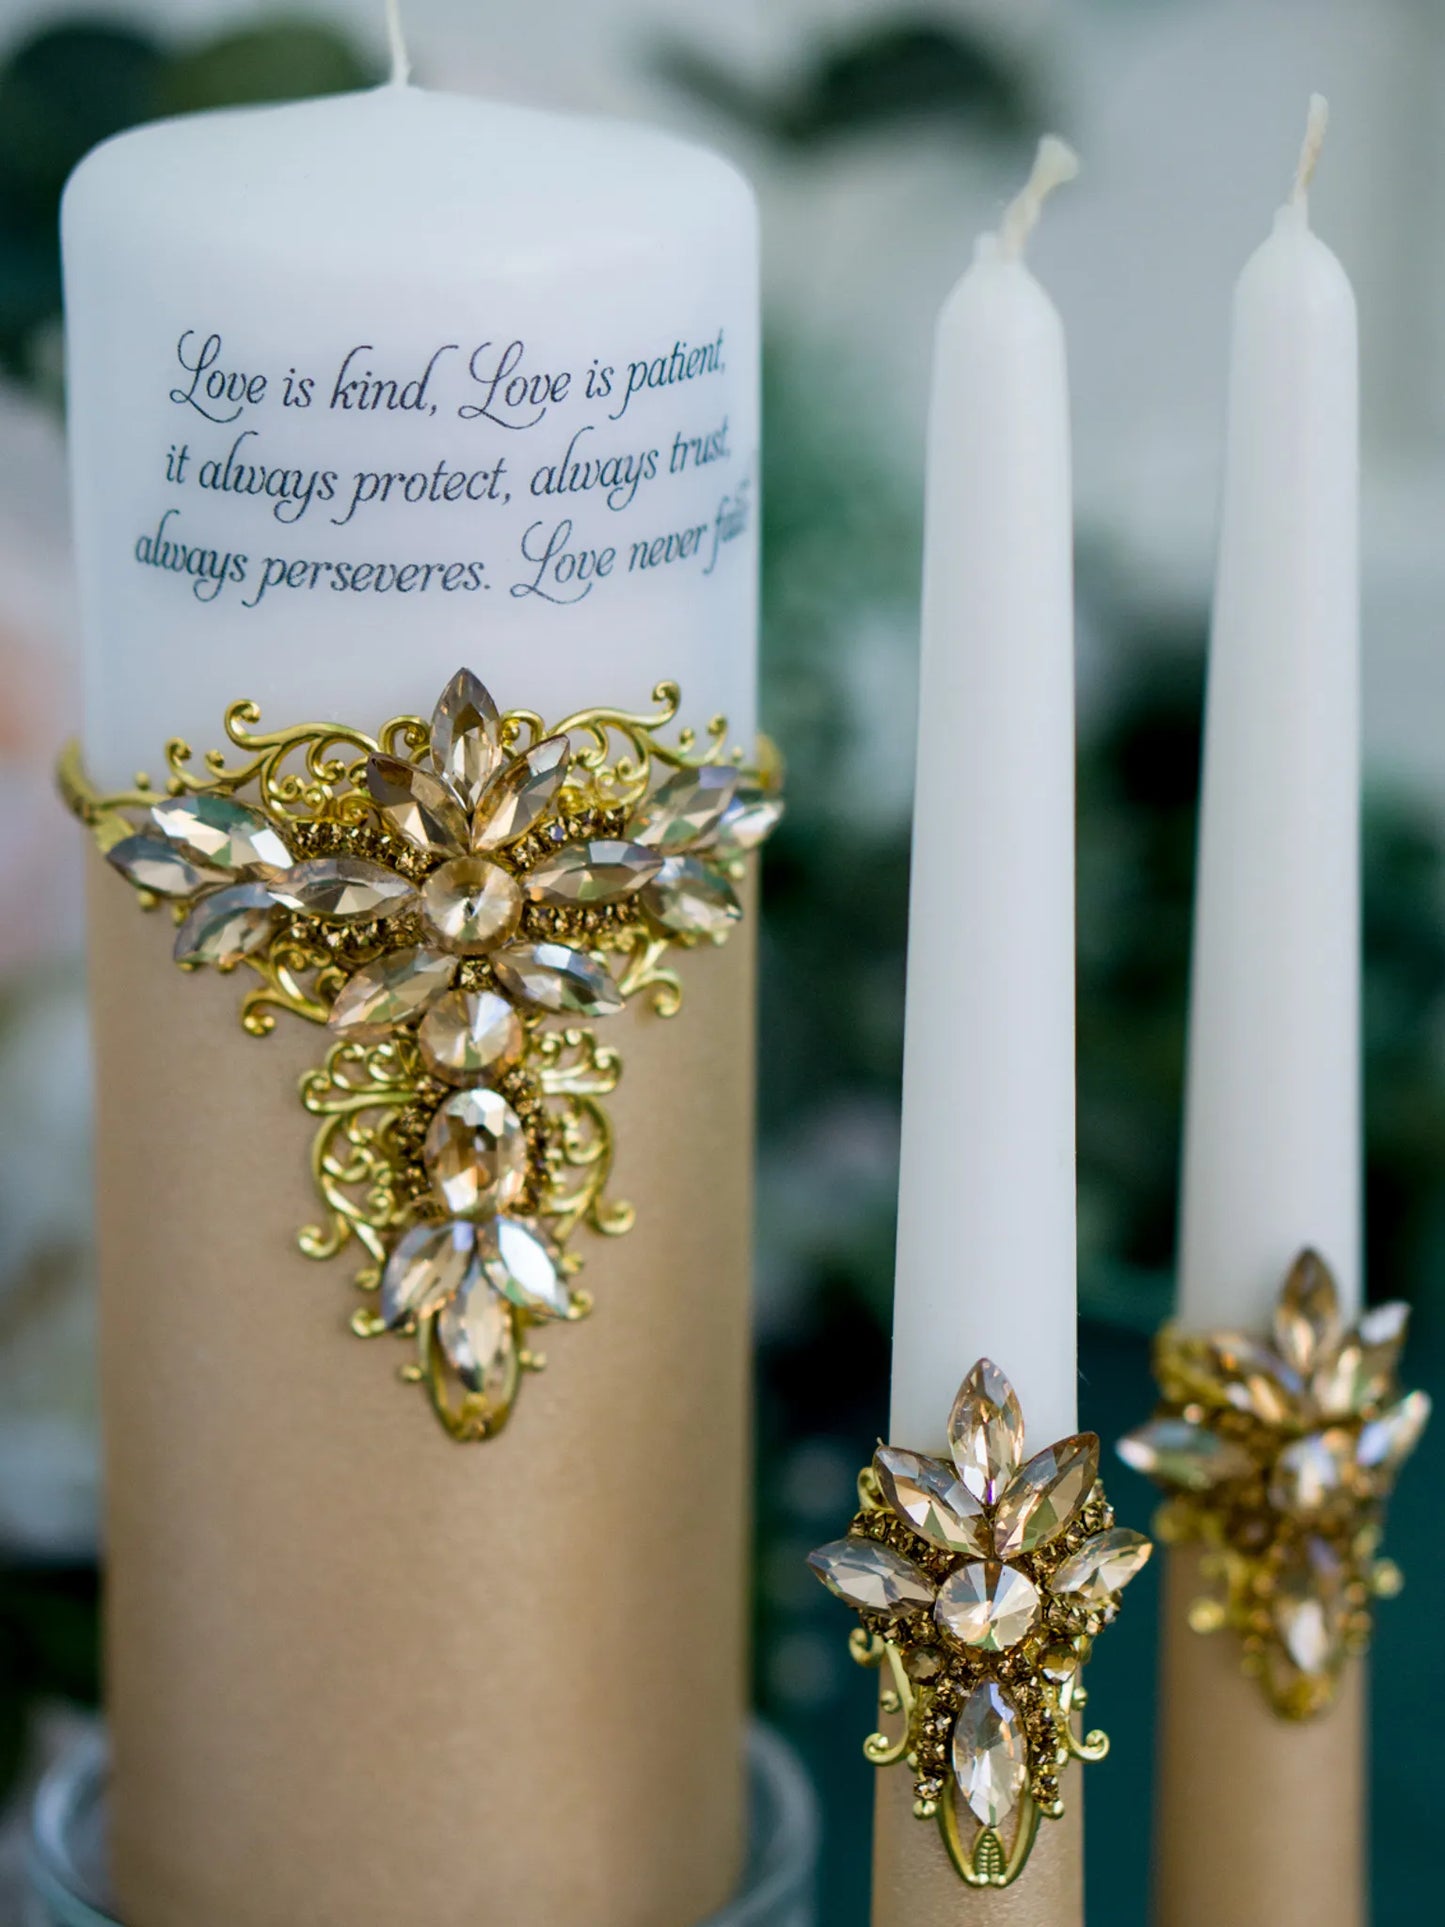 Gloria Gold Crystal Unity Candles - Personalized Elegance